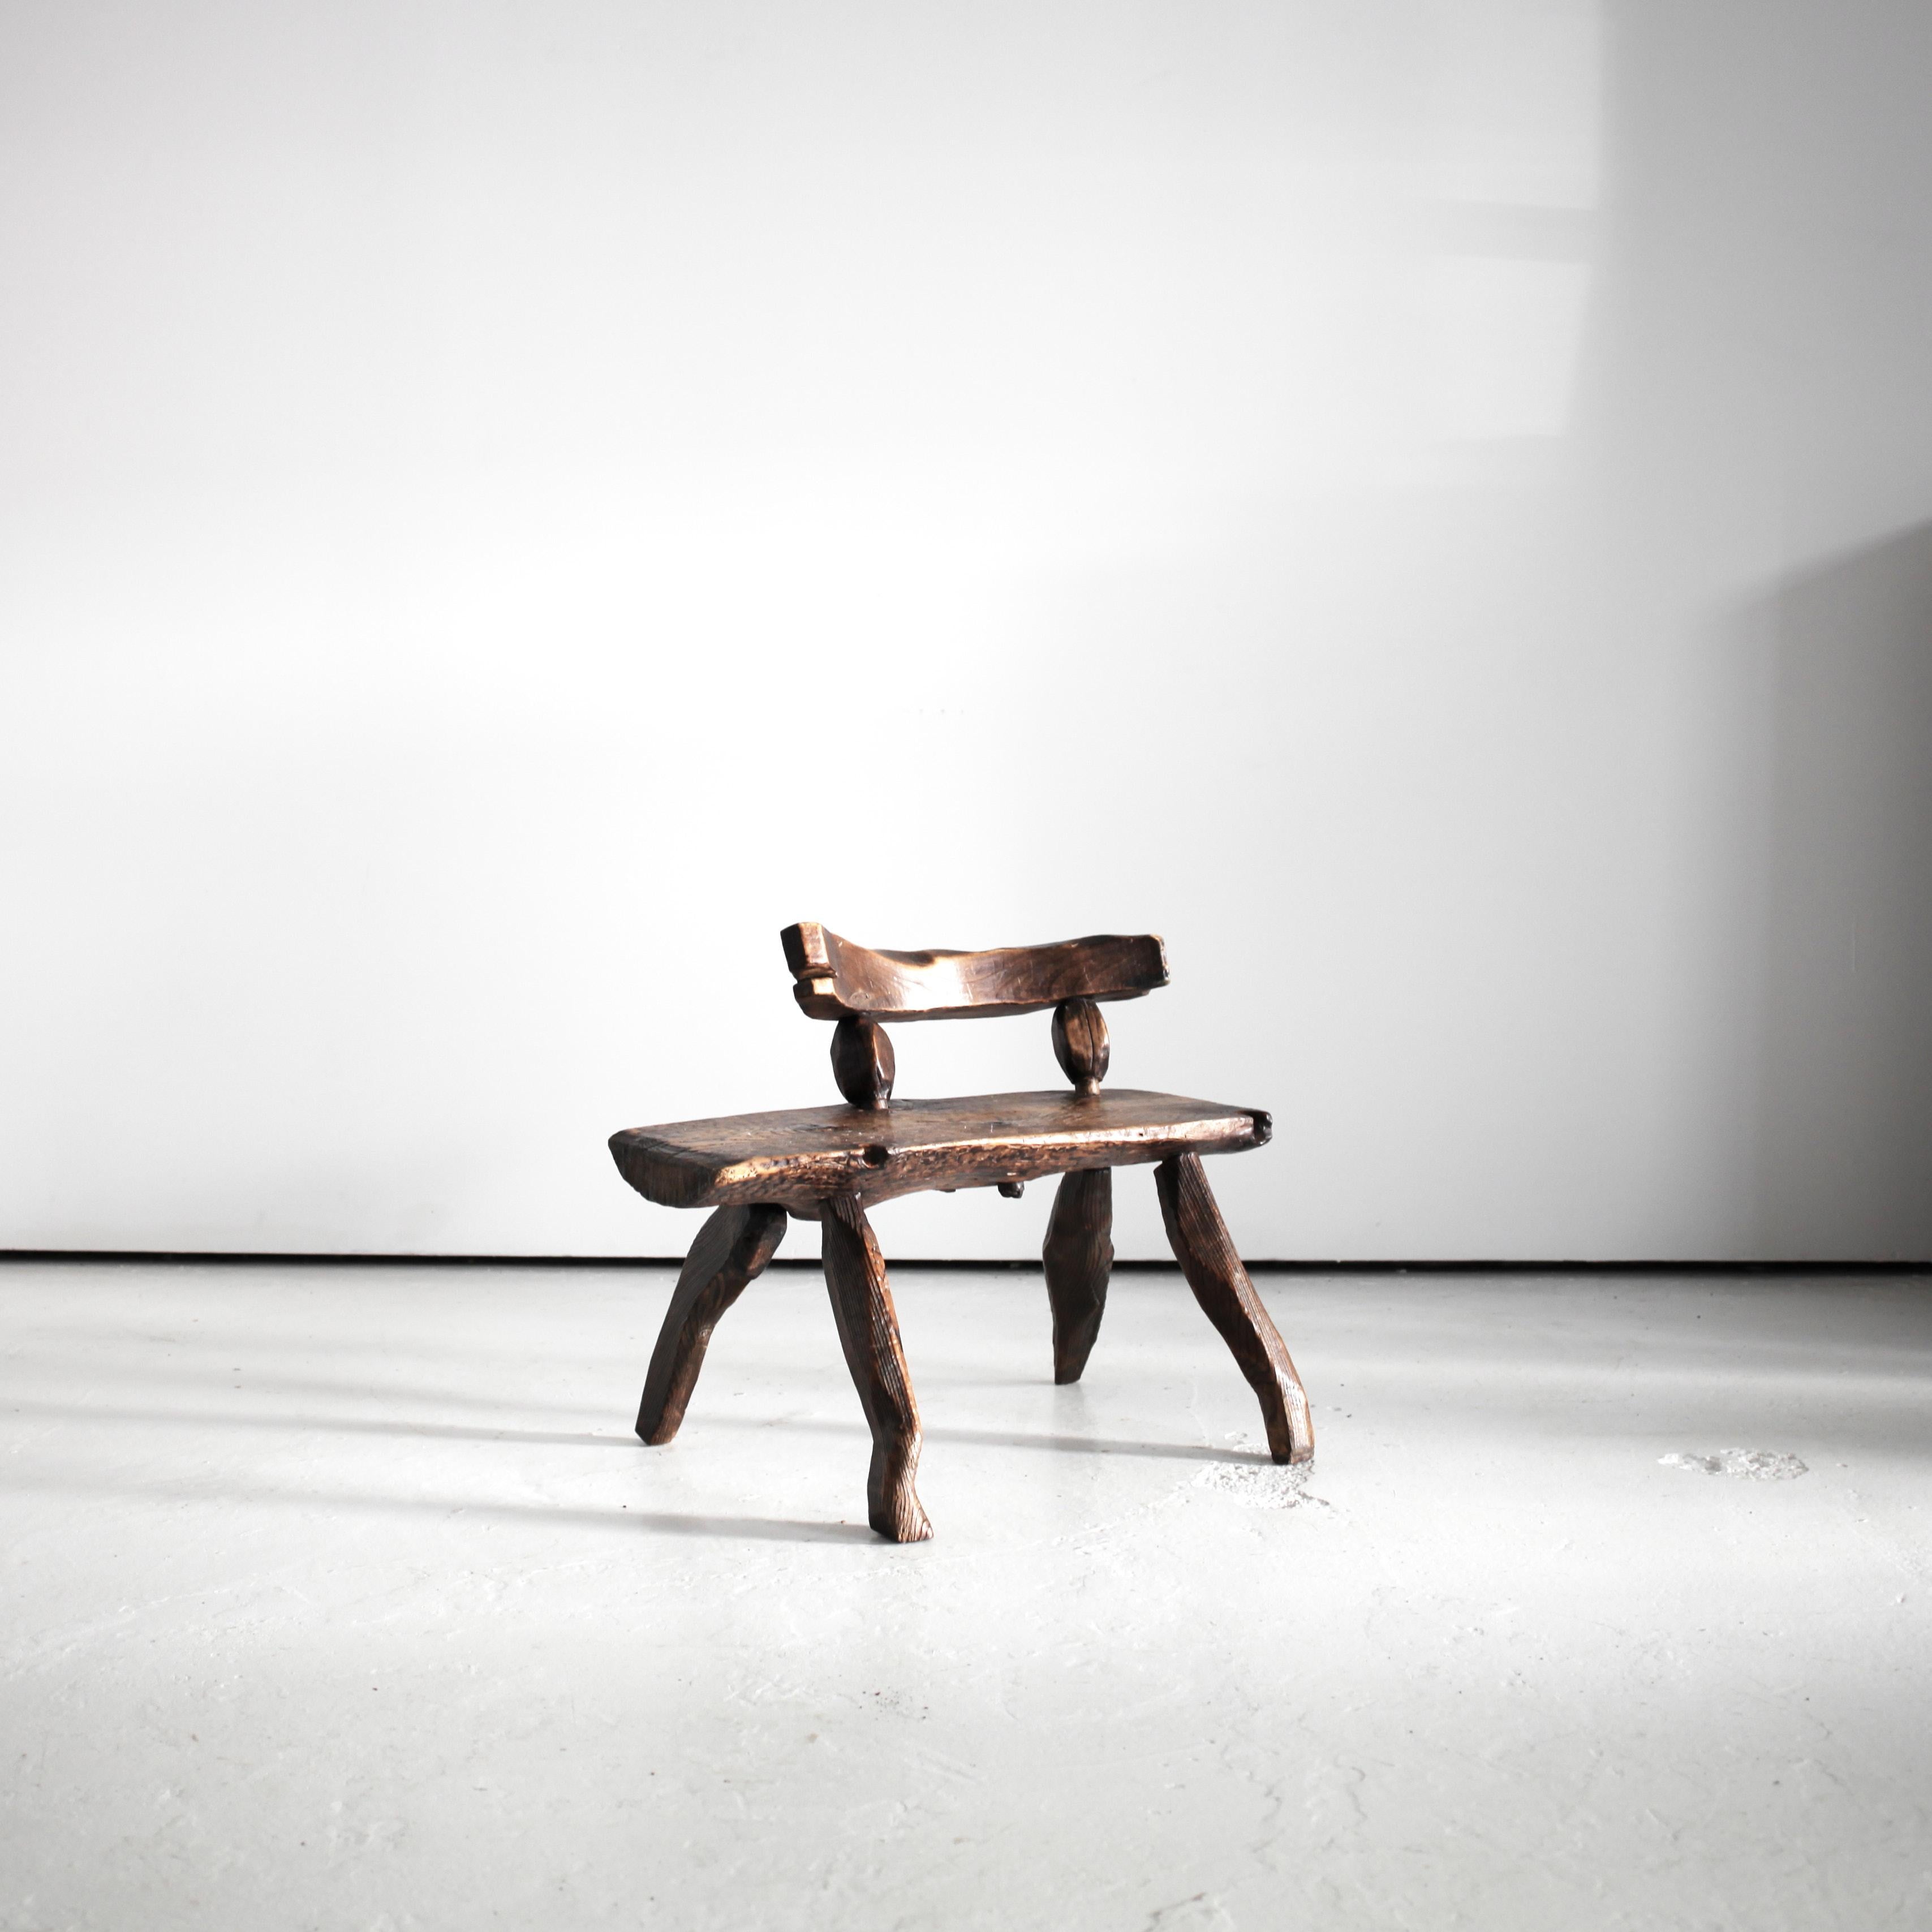 An artist made carved pine chair from Warsaw.

Distinctly carved in the Polish brutalist style.